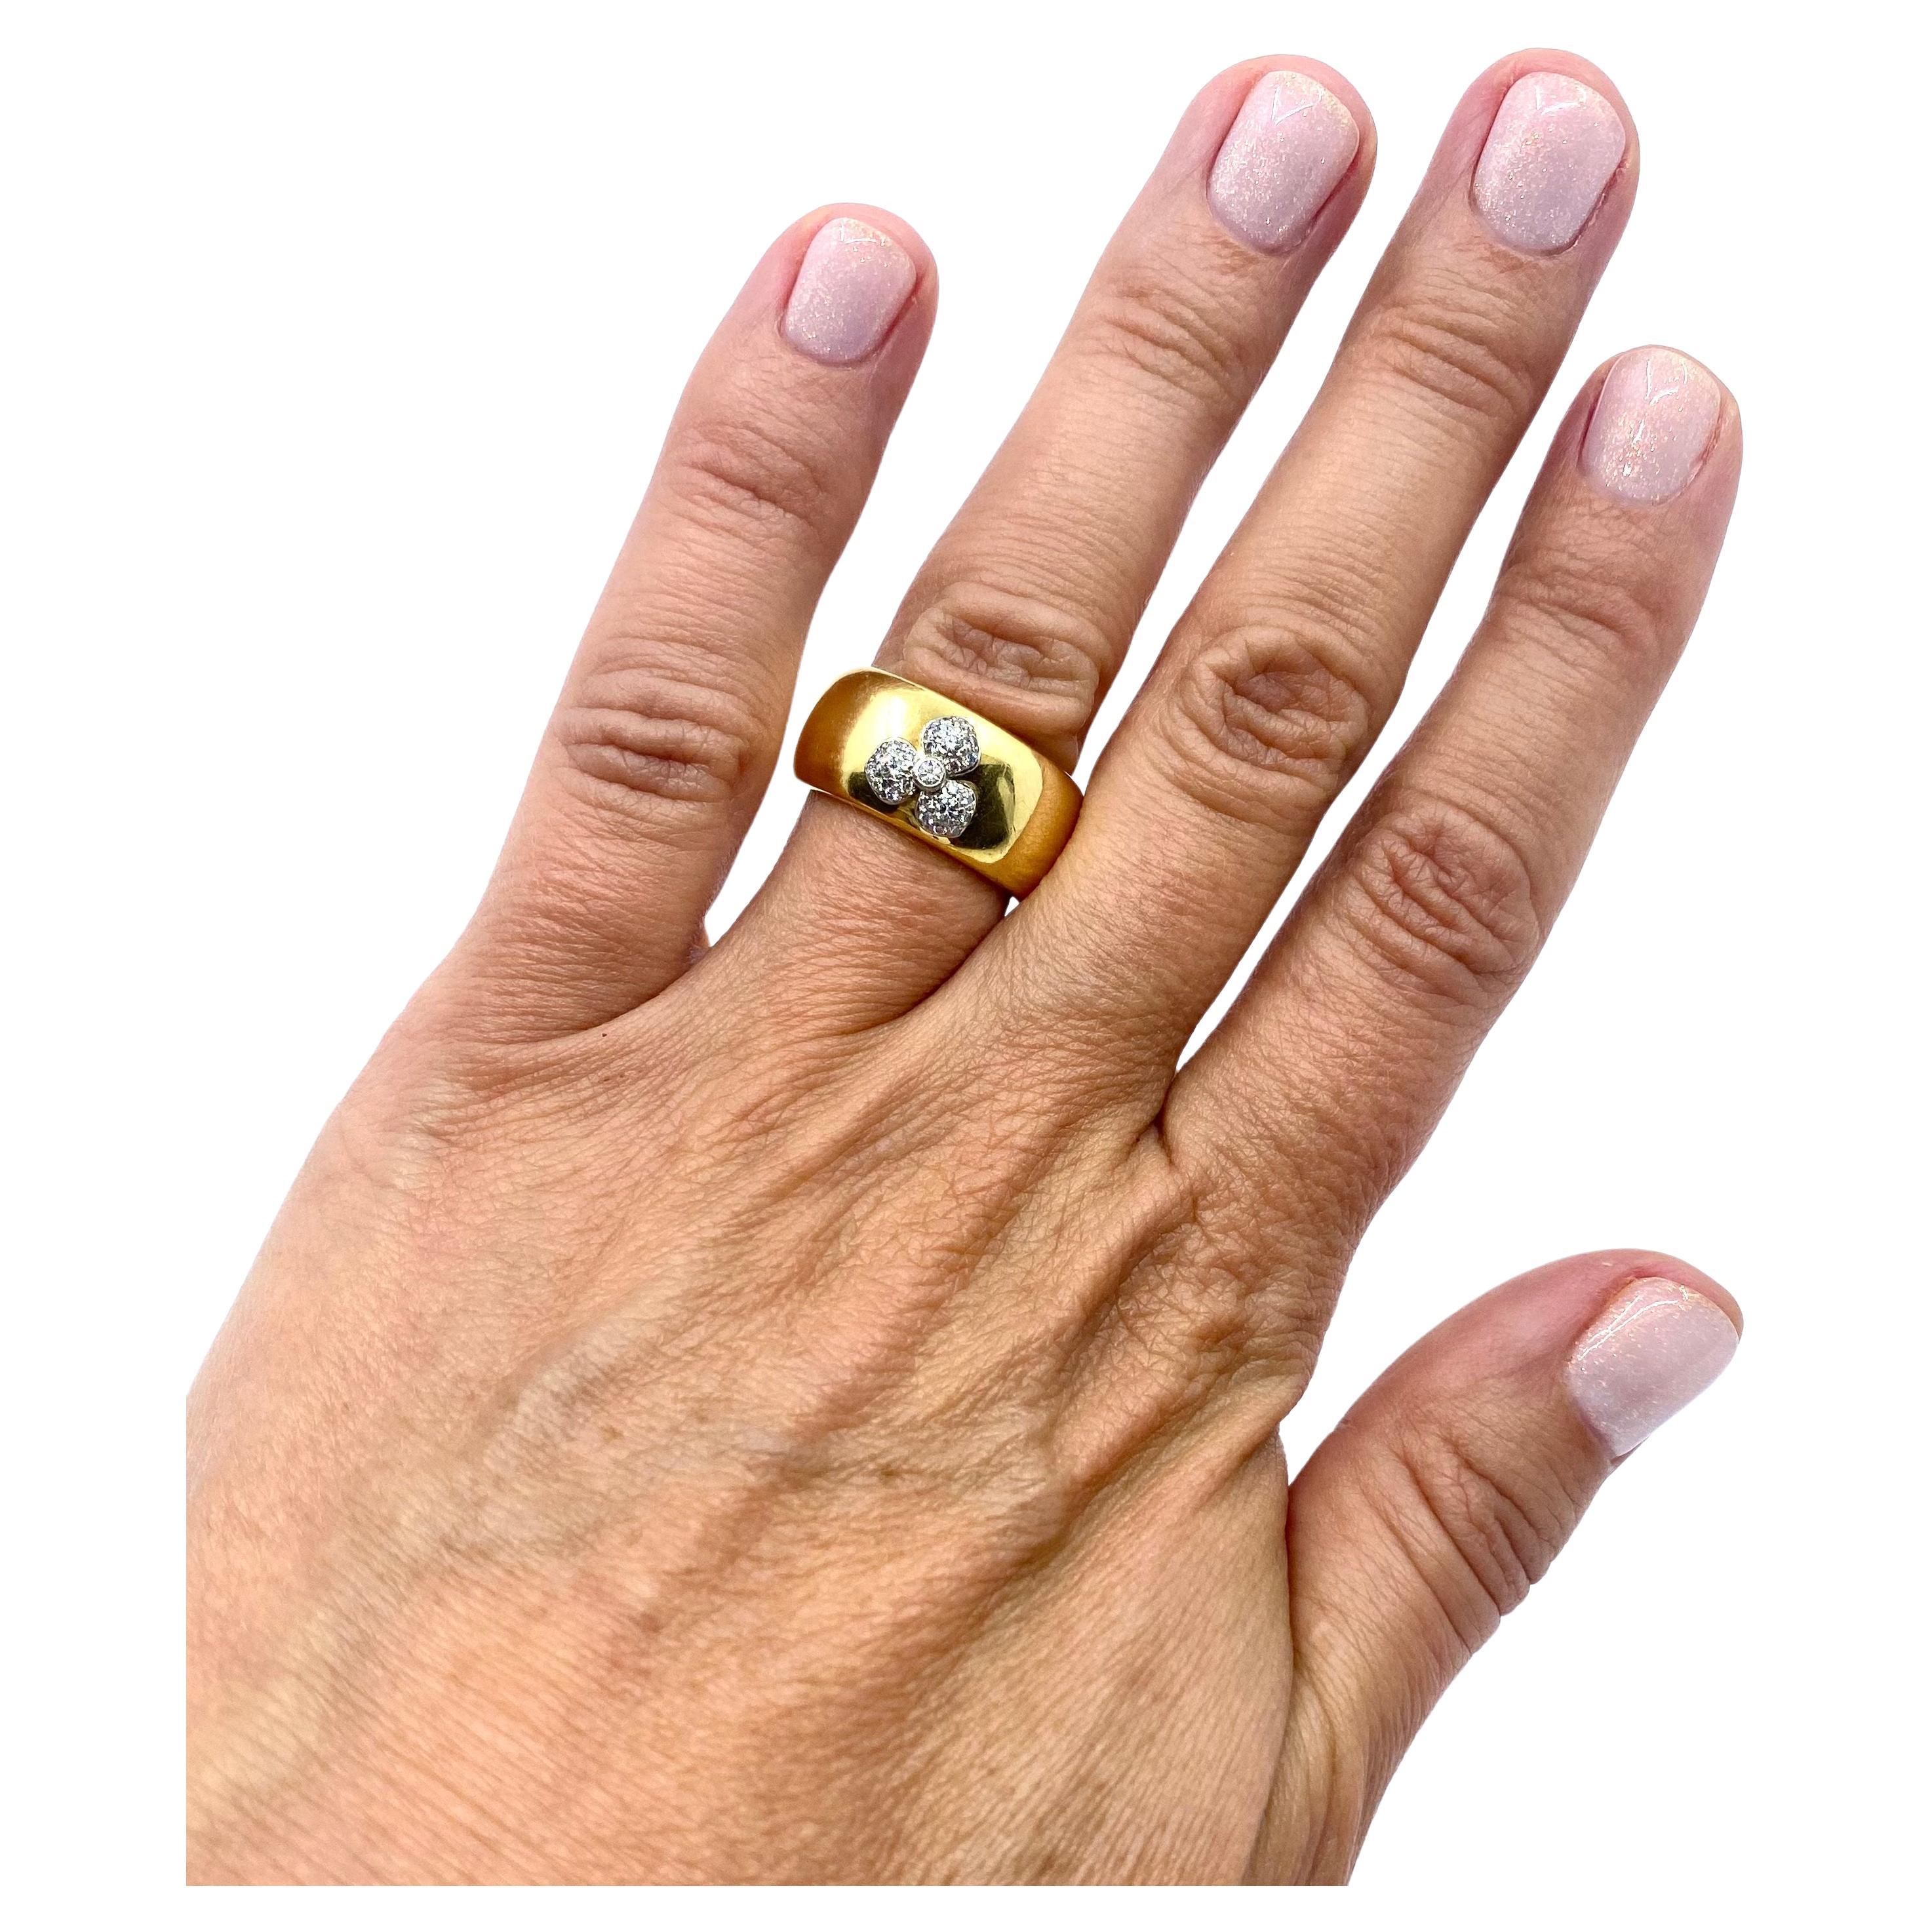 DESIGNER: Tiffany & Co.
CIRCA: 2000
MATERIALS: 18k Yellow Gold
GEMSTONE: 0.20 cts. Diamond
WEIGHT: 19.3 grams
RING SIZE: 6.25
HALLMARKS: 2000, Tiffany & Co. , 750, PT950, France

ITEM DETAILS:
A beautiful 18k gold cigar band with diamond by Angela